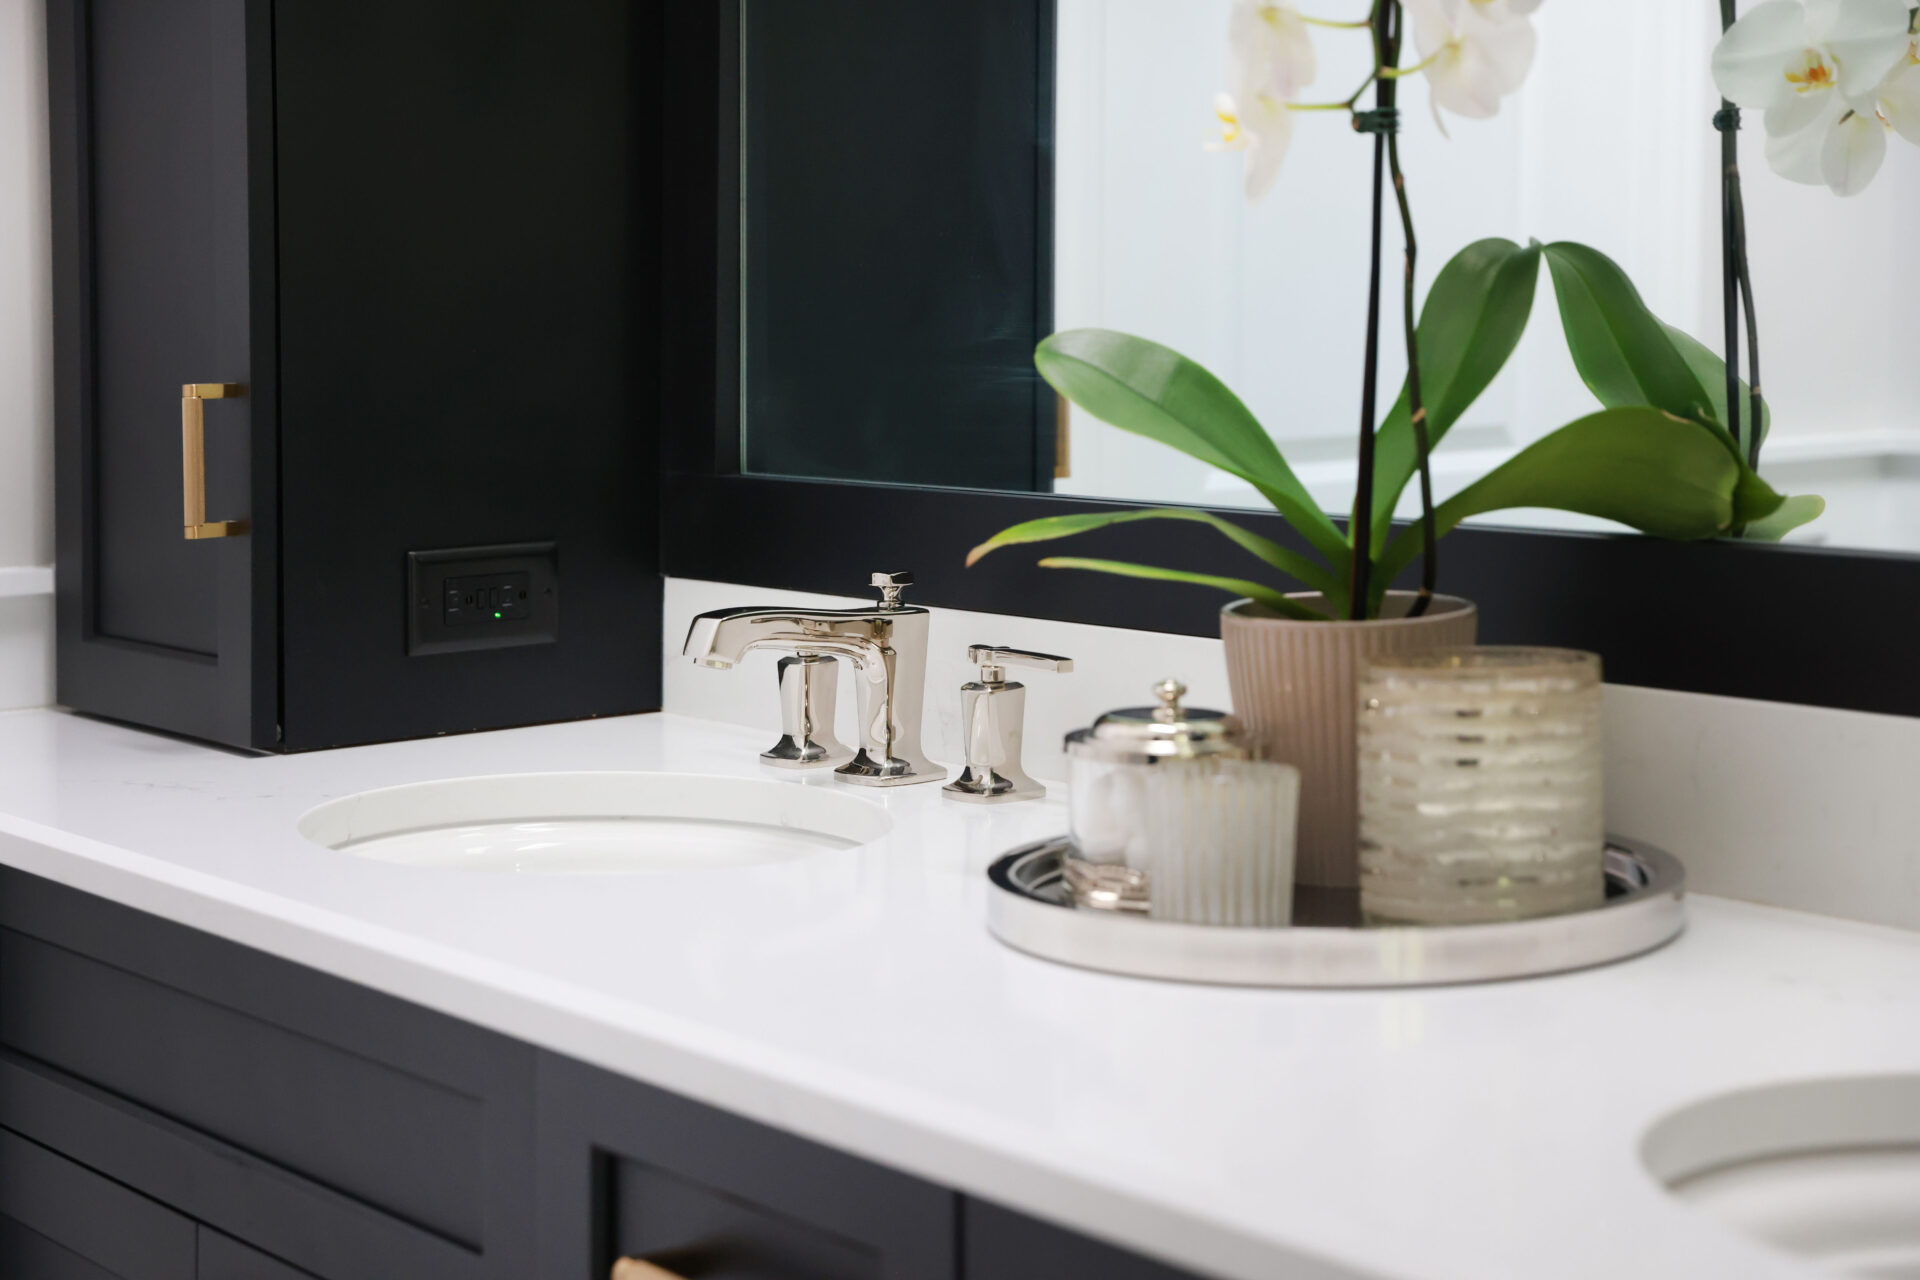 Black bathroom cabinets with white countertop